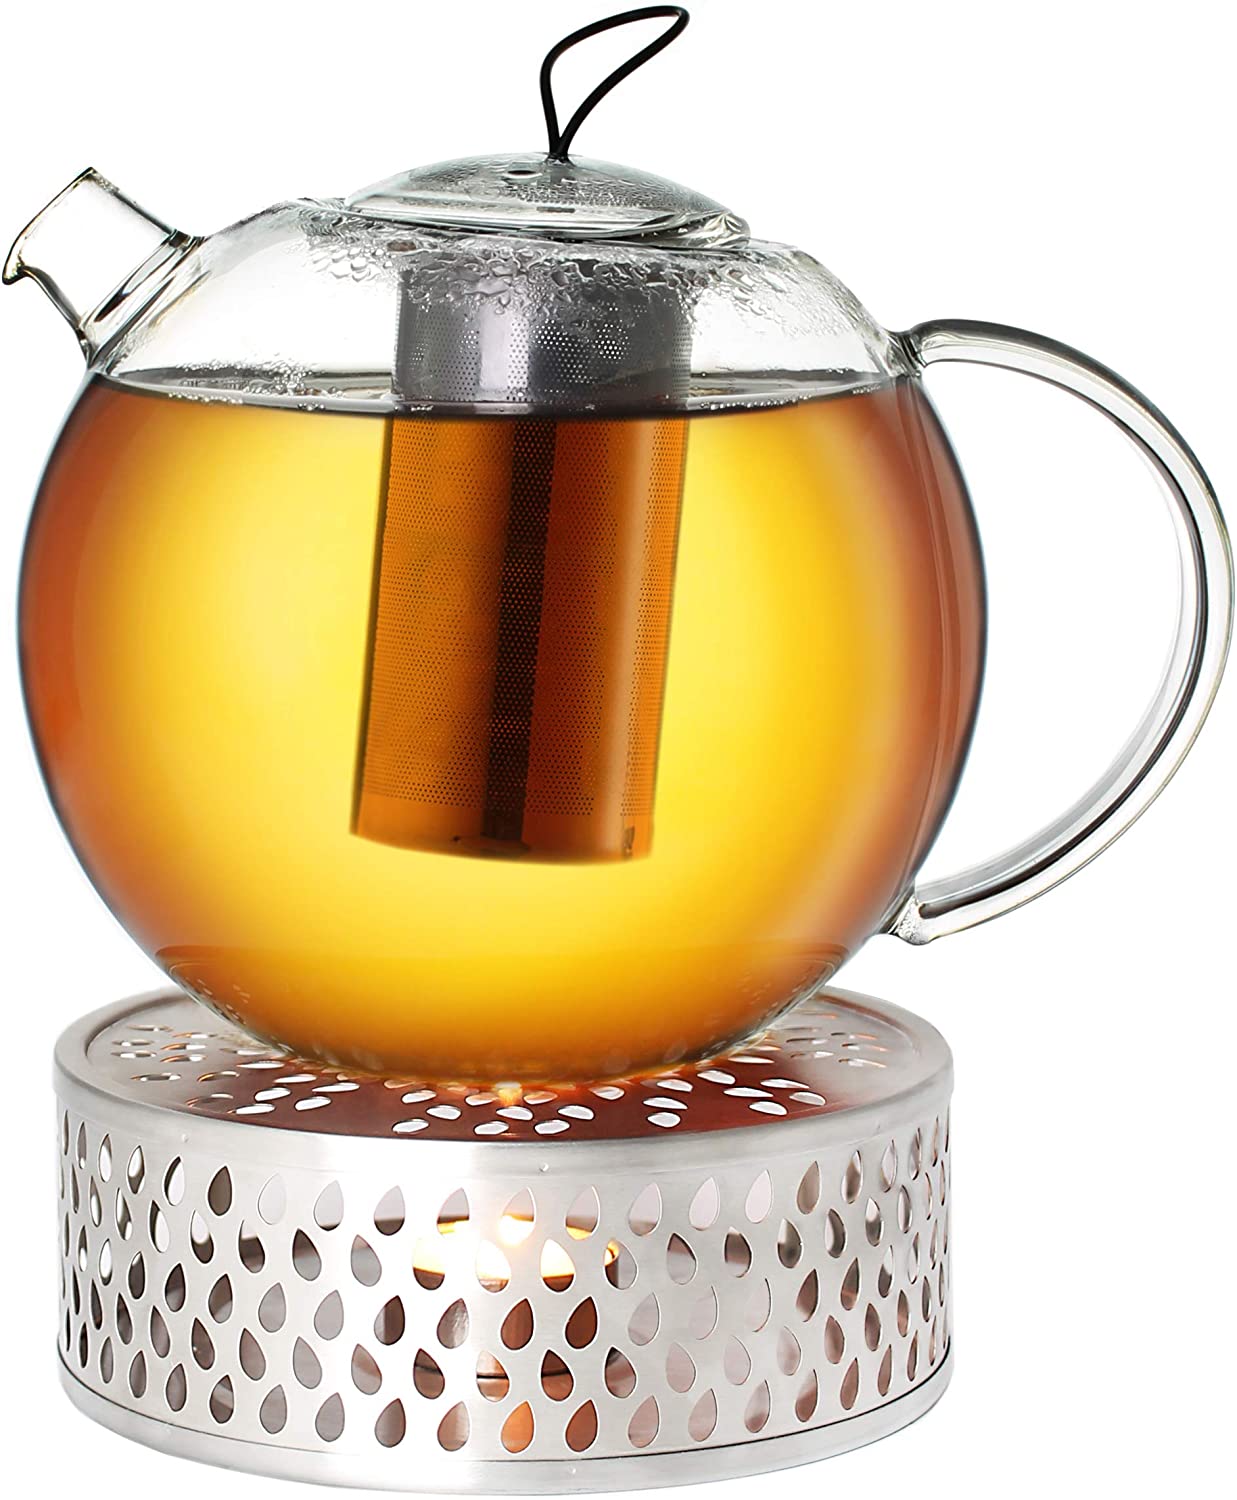 Creano Glass teapot 2.0 l jumbo + a stainless steel warmer, 3-piece glass teapot with integrated stainless steel strainer and glass lid, ideal for preparing loose teas, drip-free